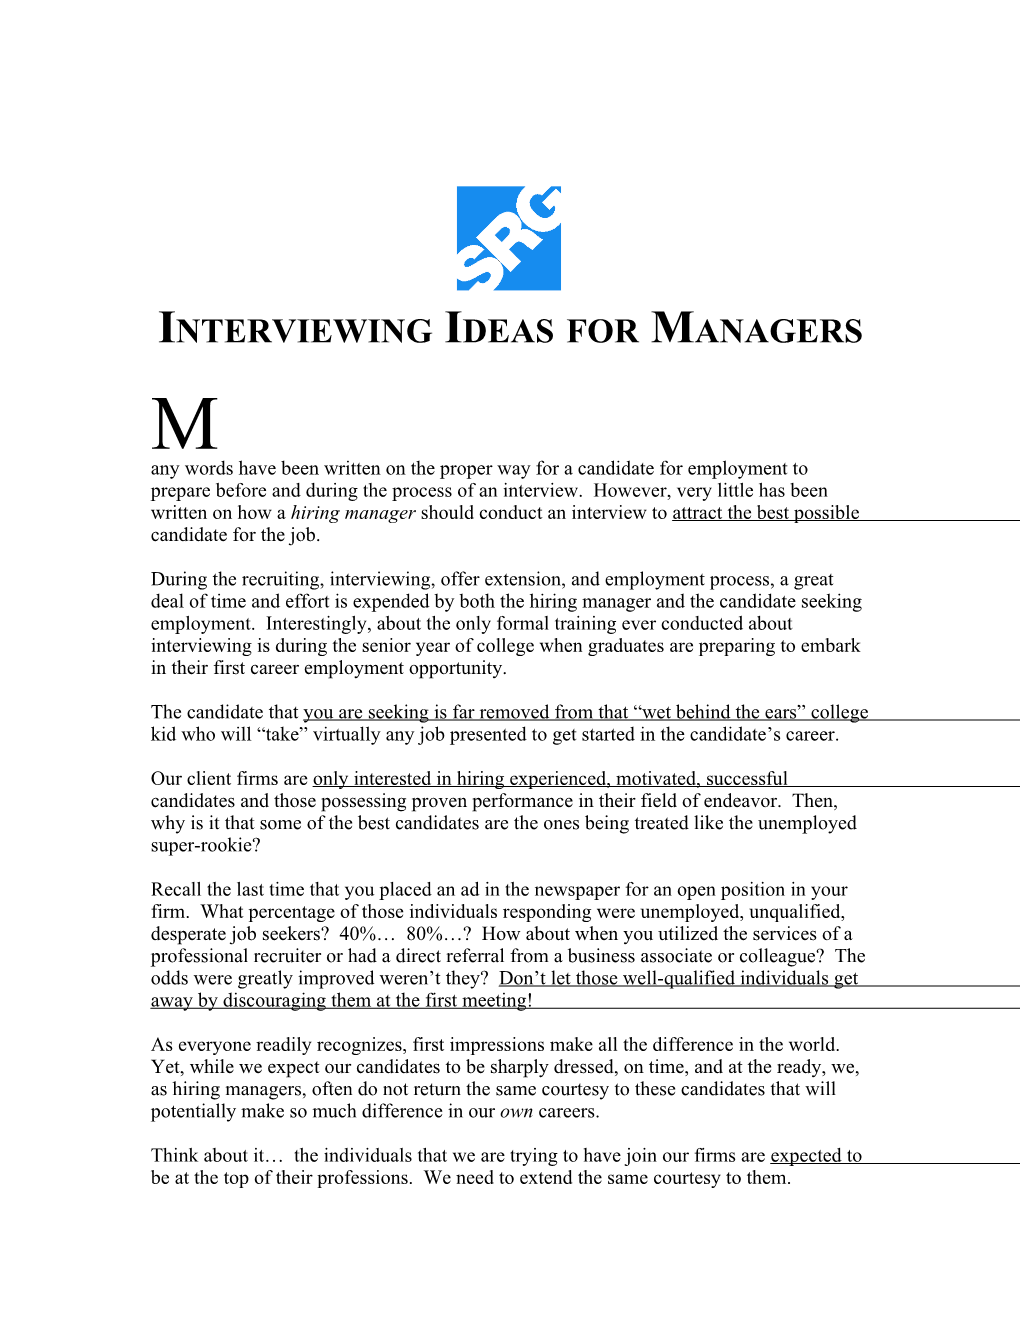 Interviewing Ideas for Managers